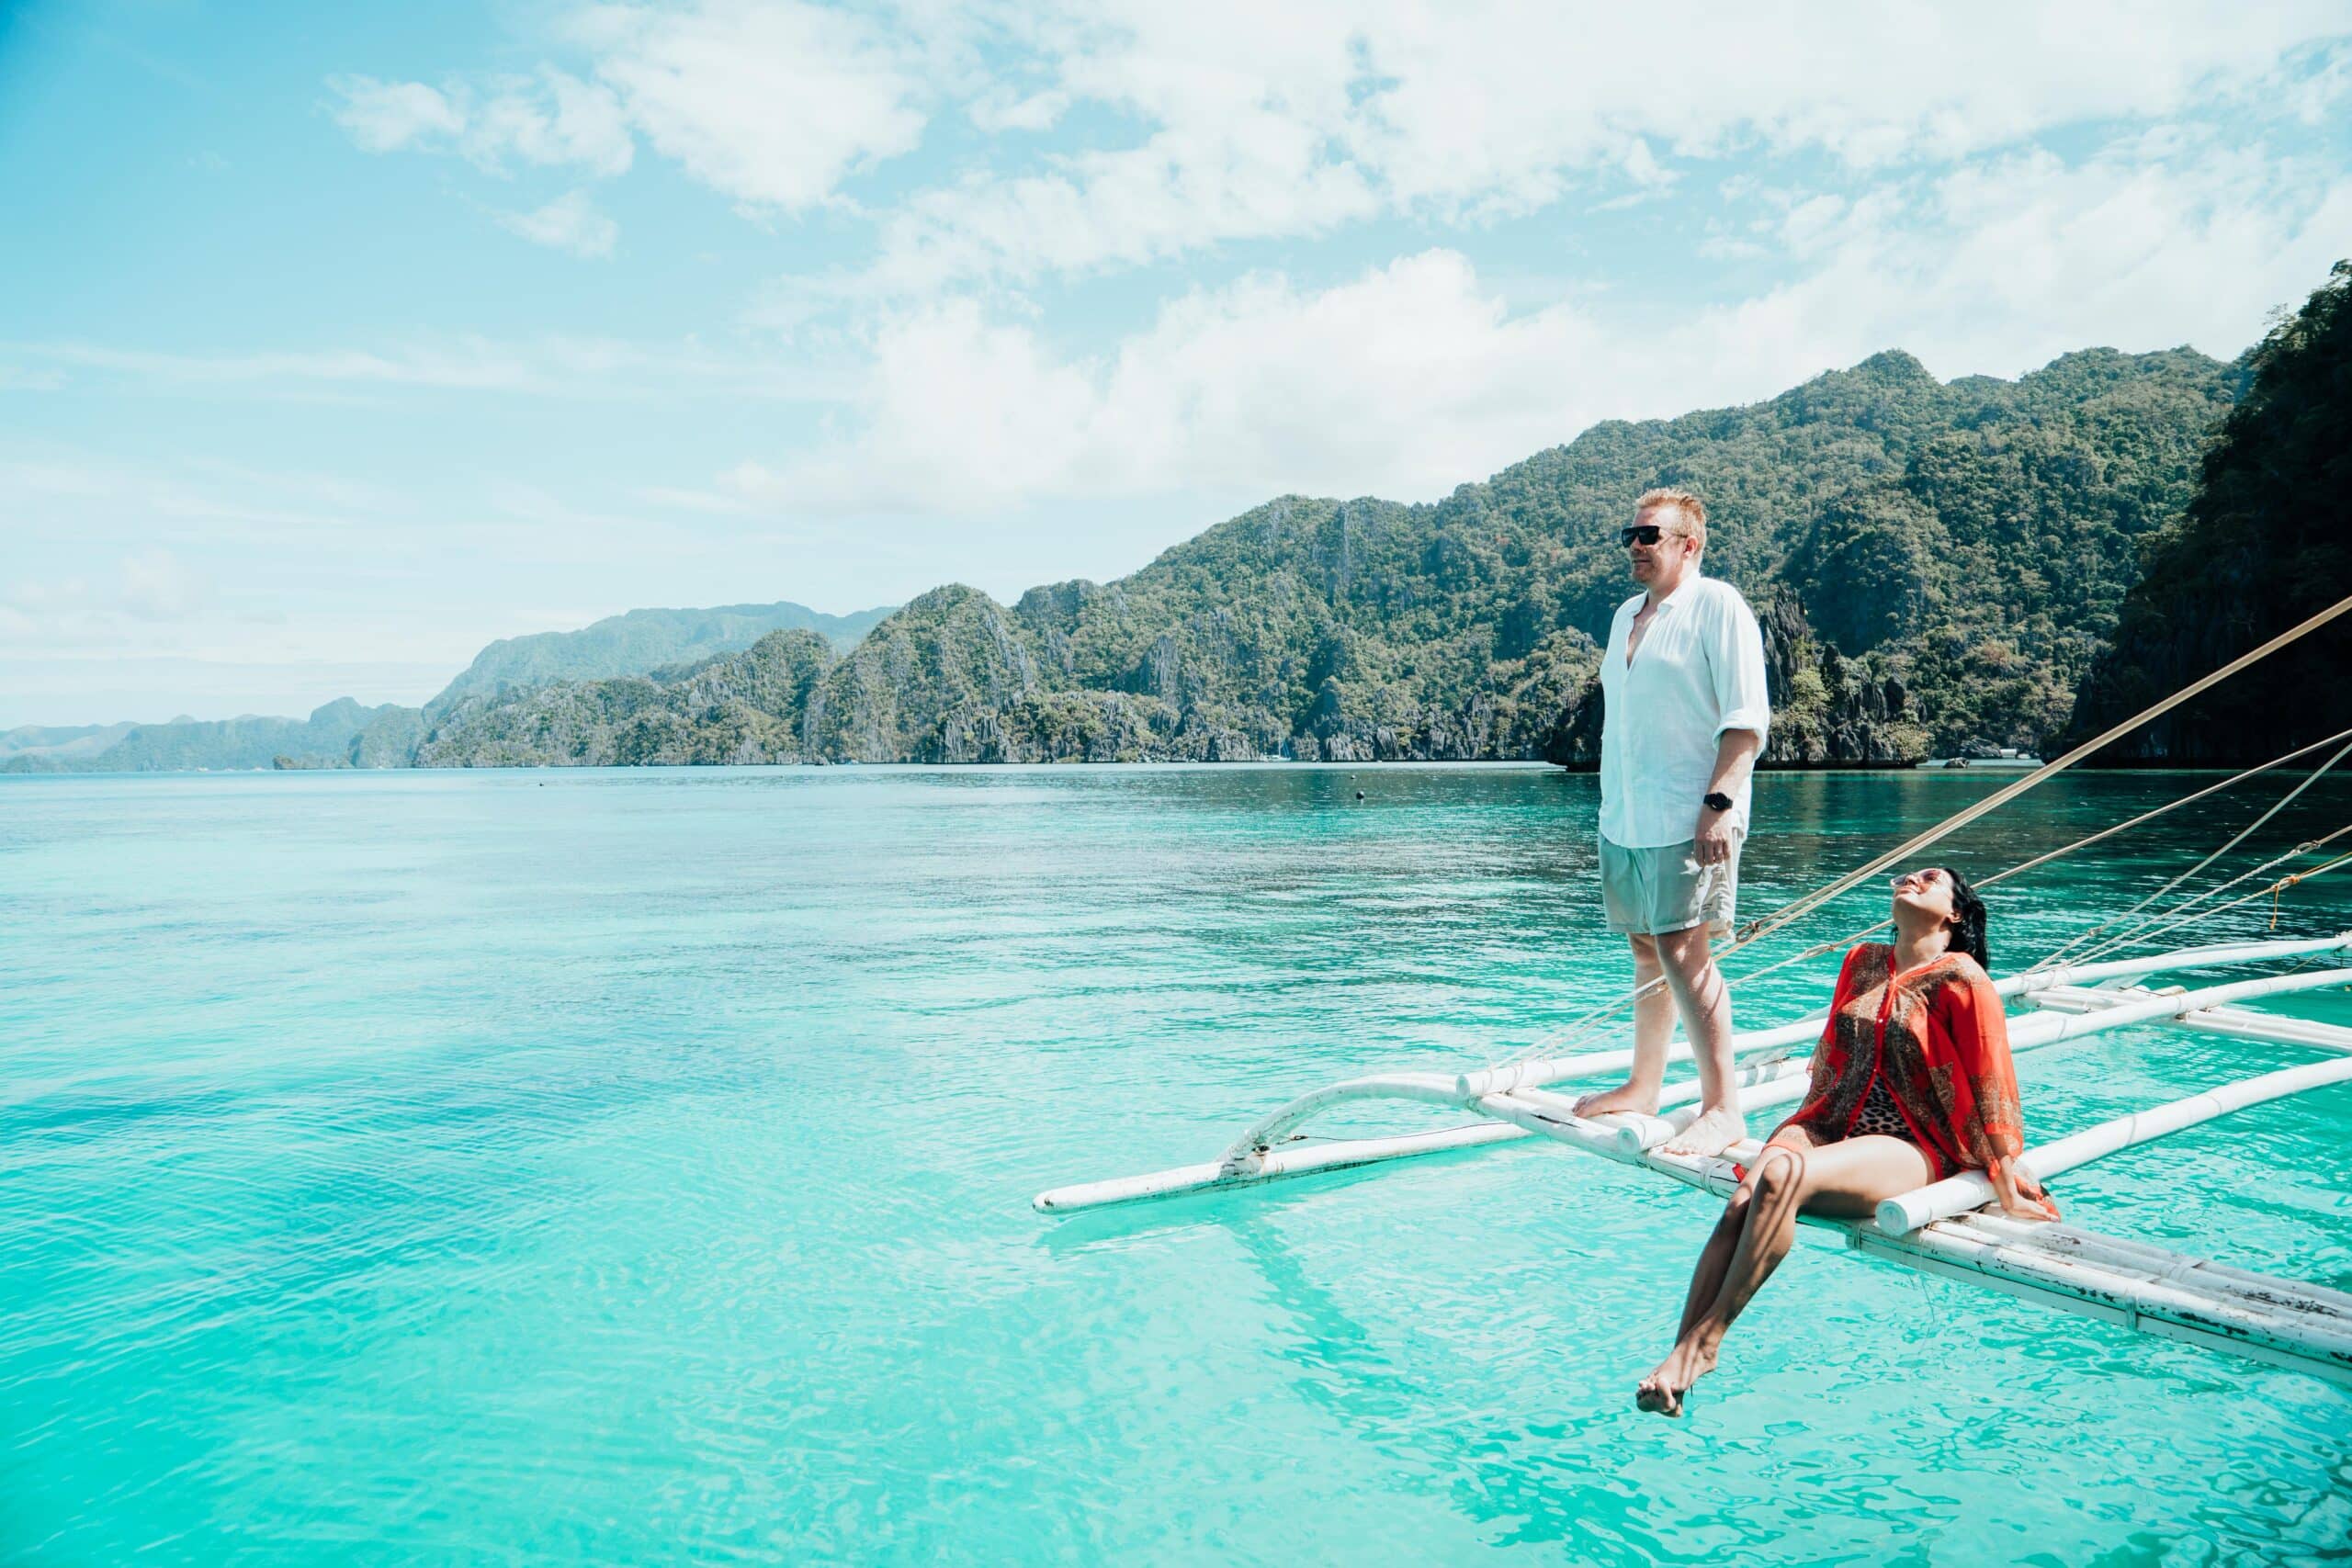 top-spots-to-visit-coron-palawan-private-island-hopping-boat-tour-beach.